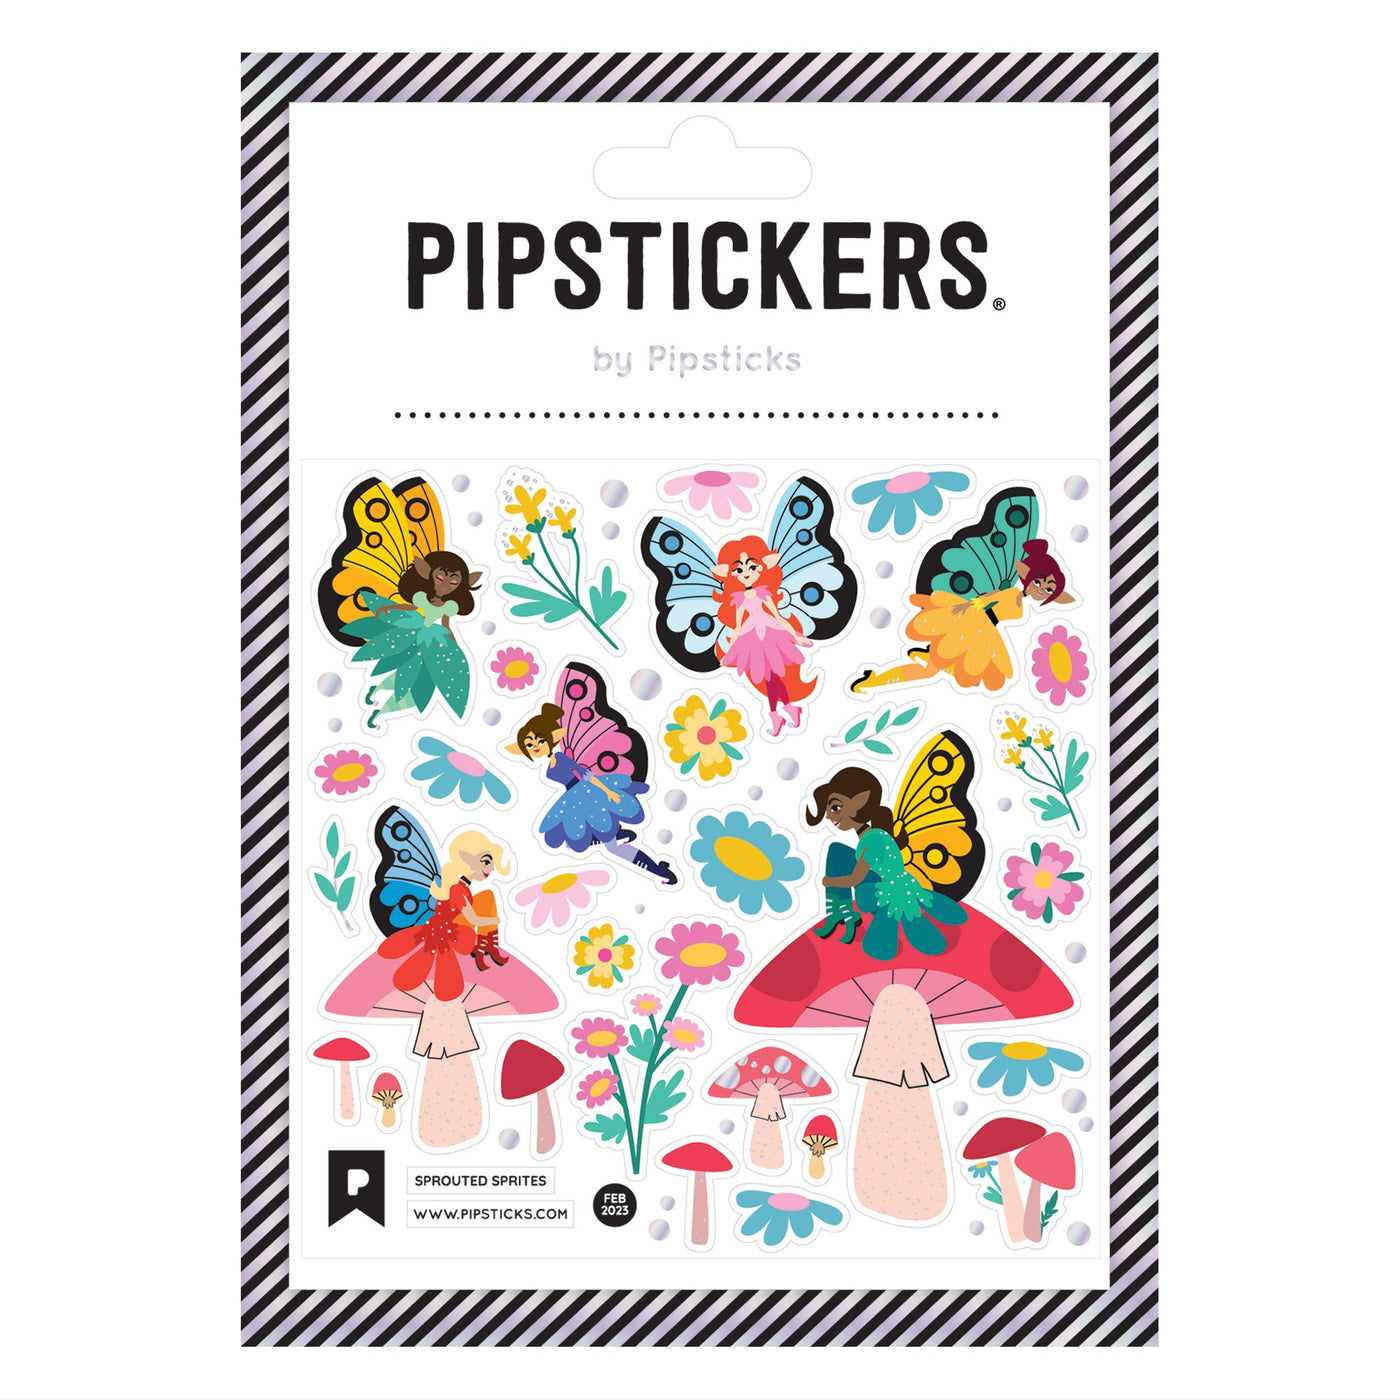 Sprouted Sprites by Pipsticks